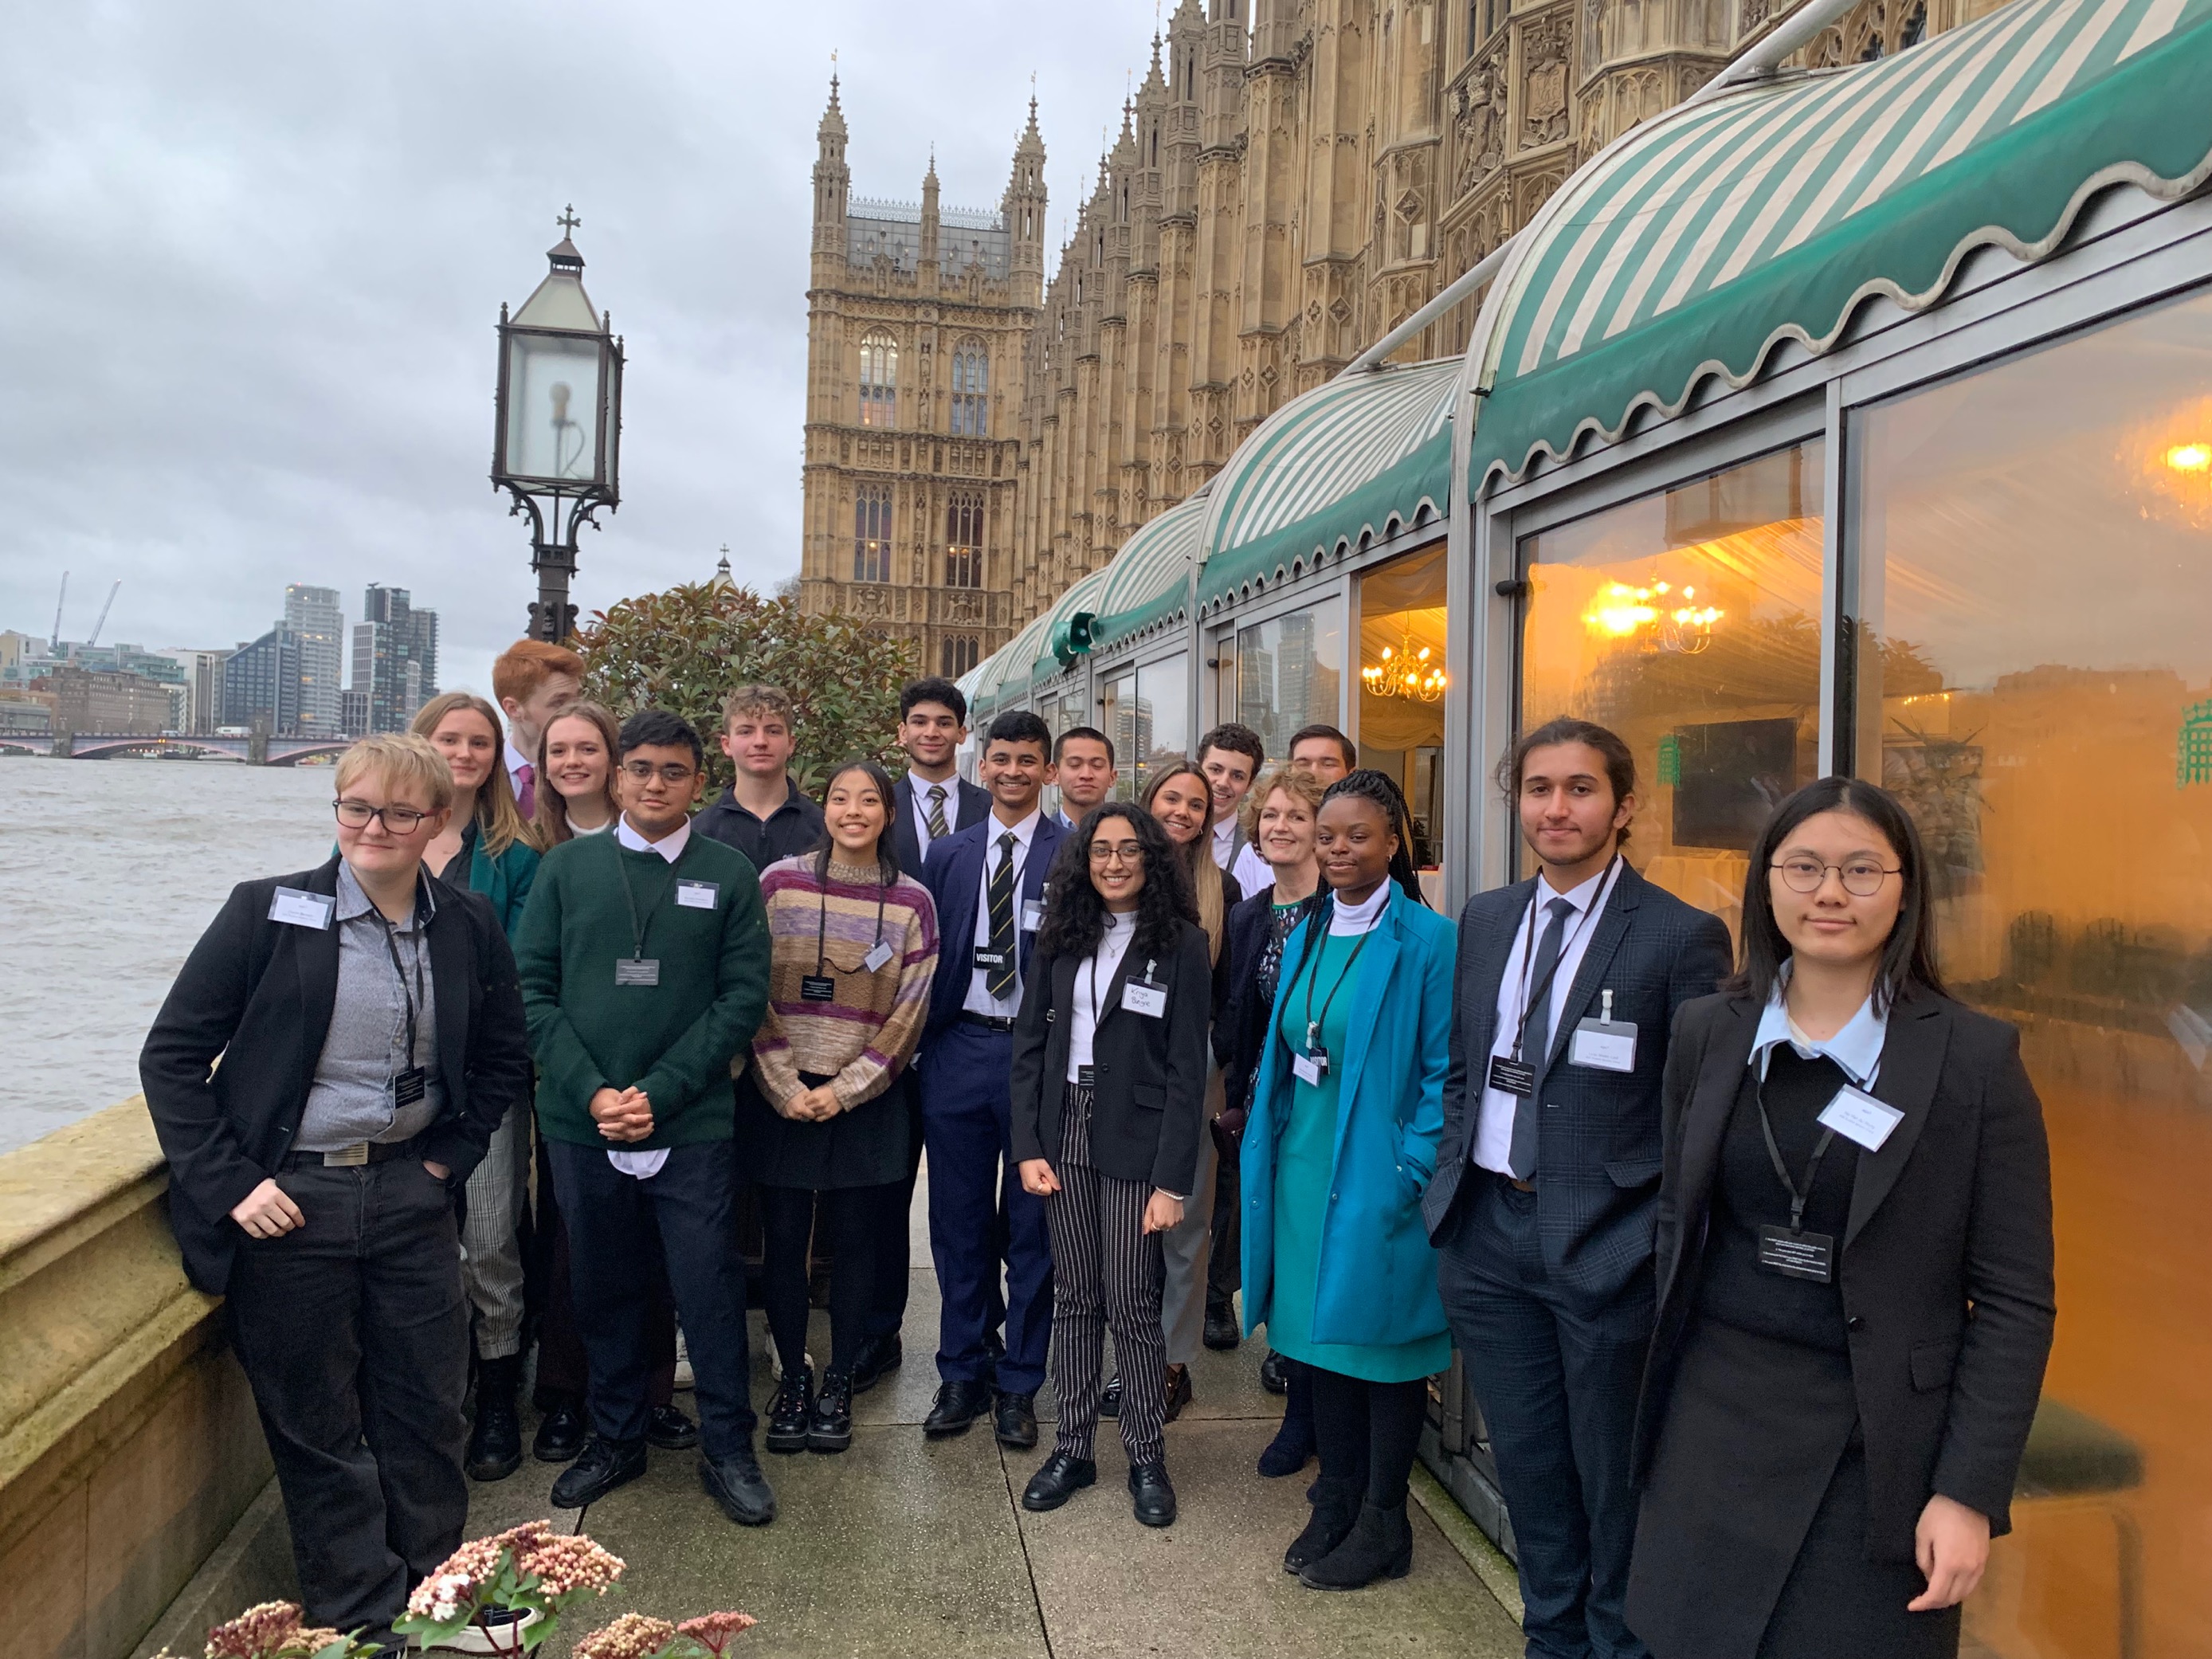 Members of the AQA Student Advisory Group for 2023 gathered outside at a parliamentary reception in London.